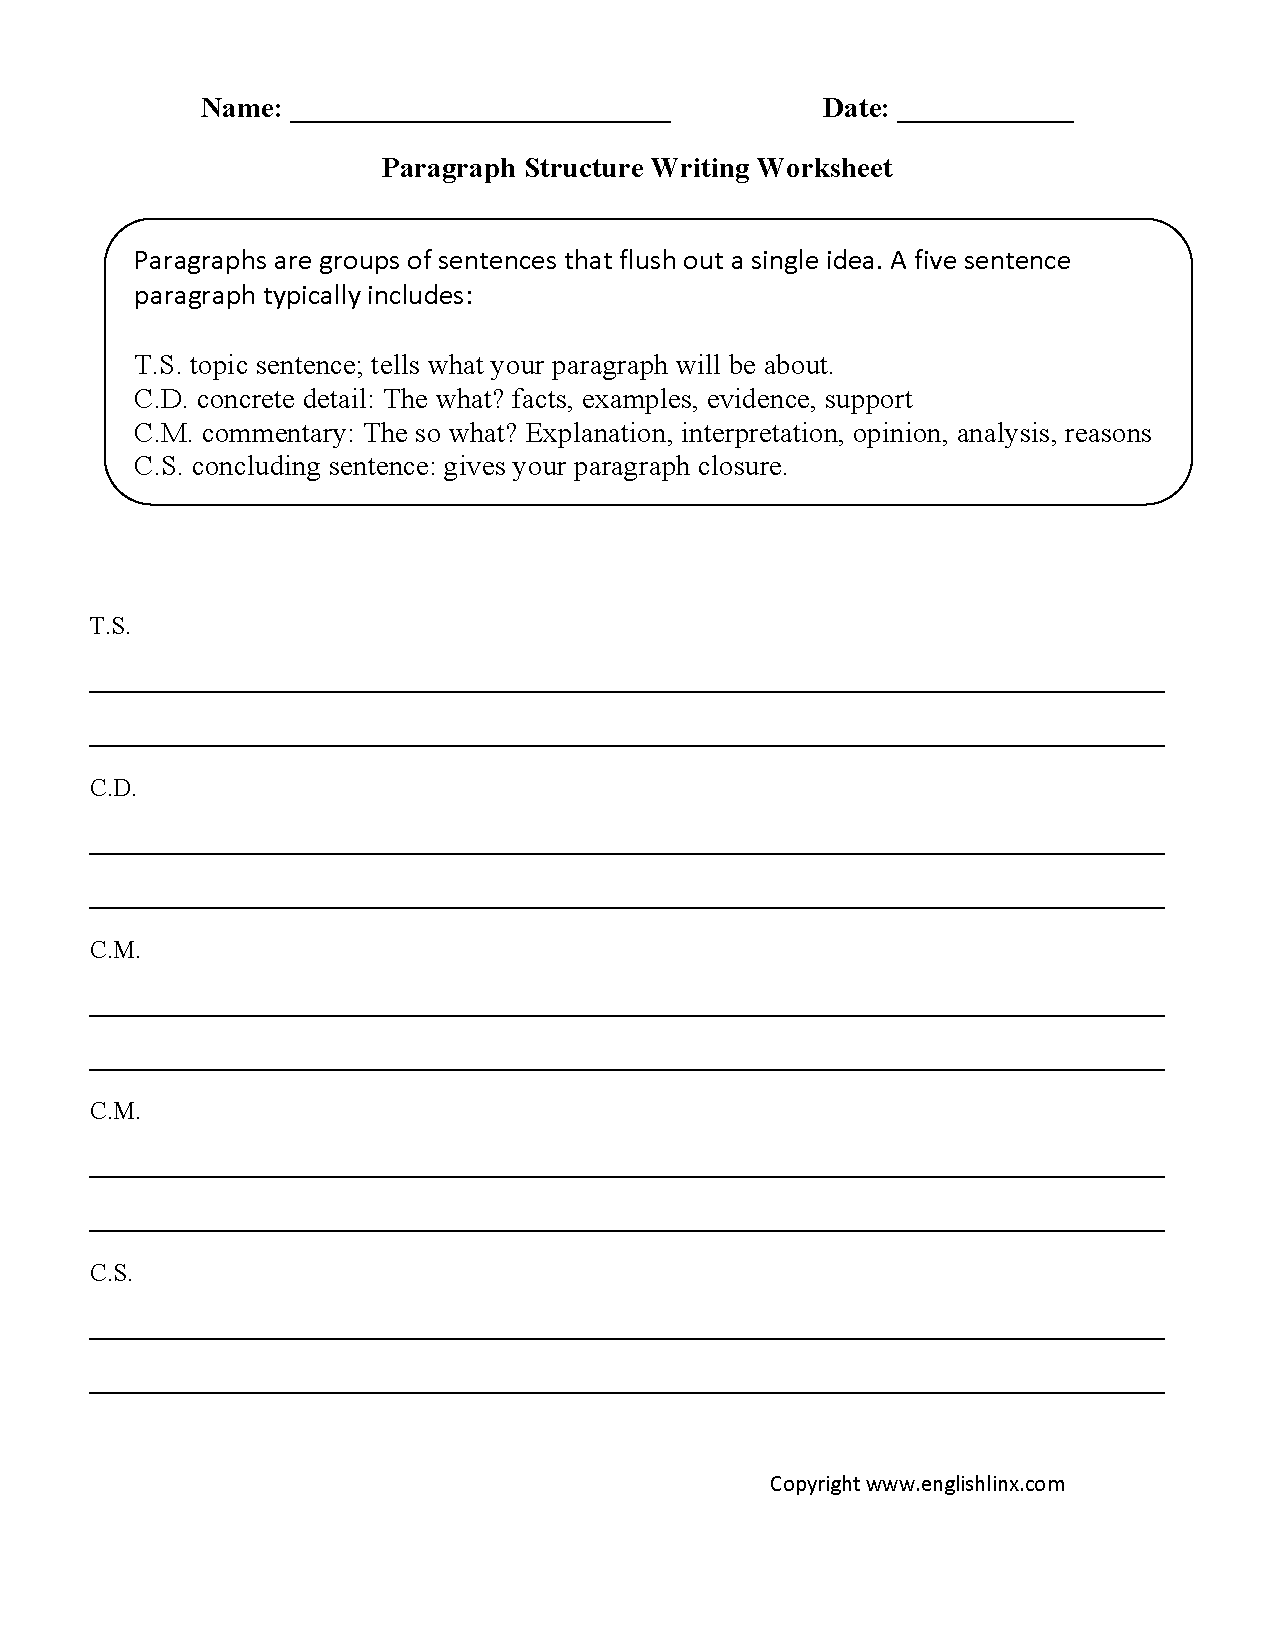 16 Best Images Of Free Paragraph Writing Worksheets Creative Writing Worksheets Paragraph